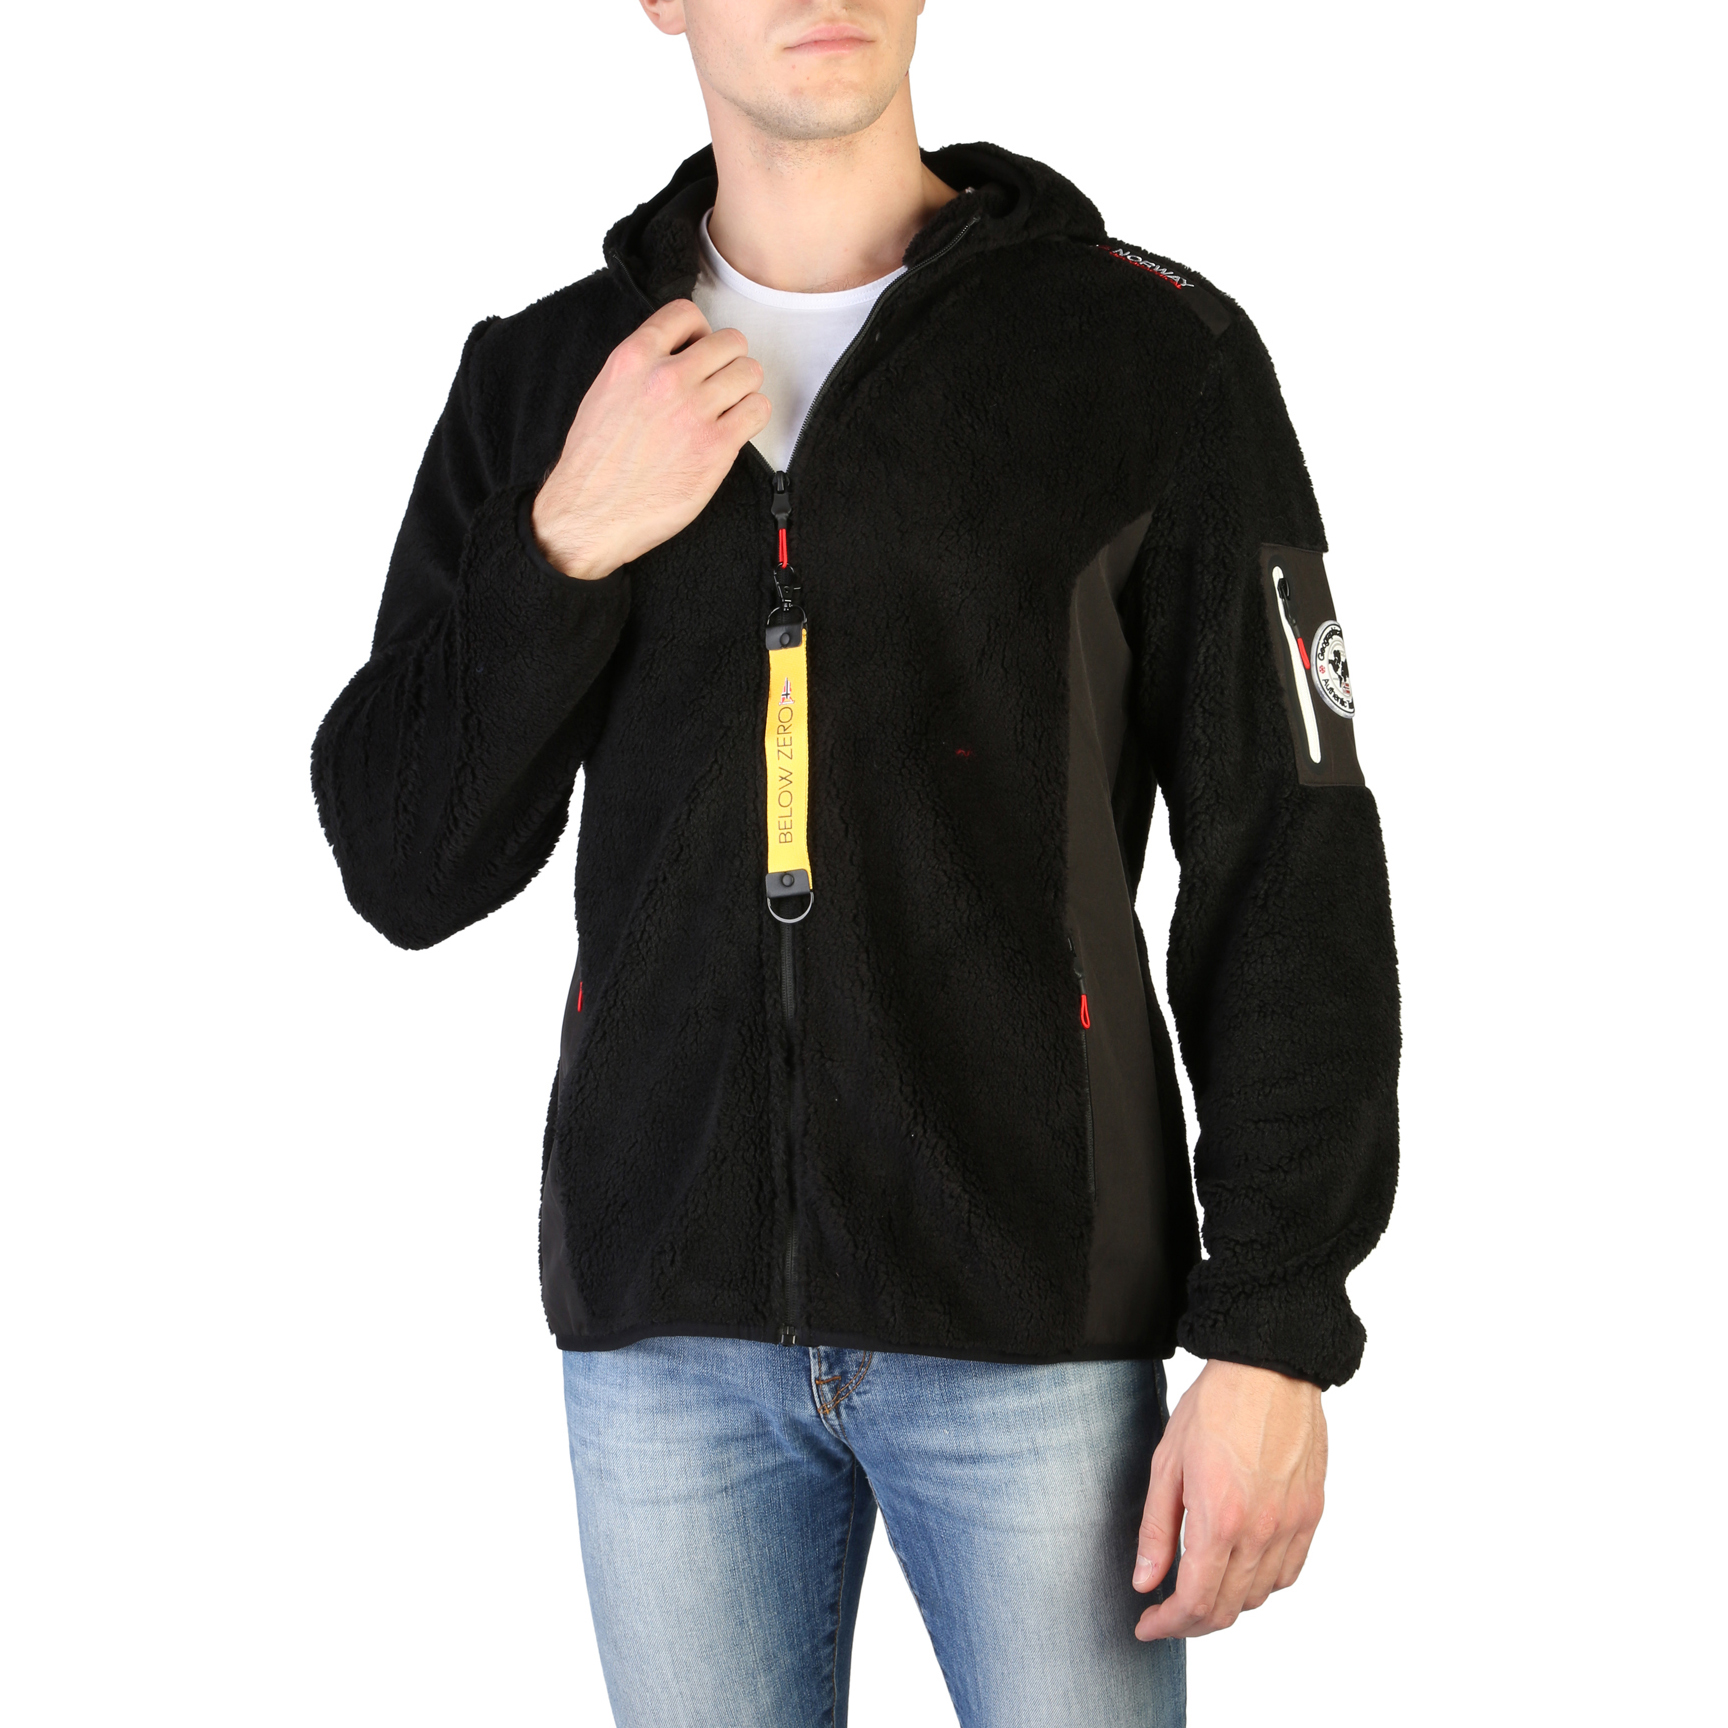 Geographical Norway Tufour man